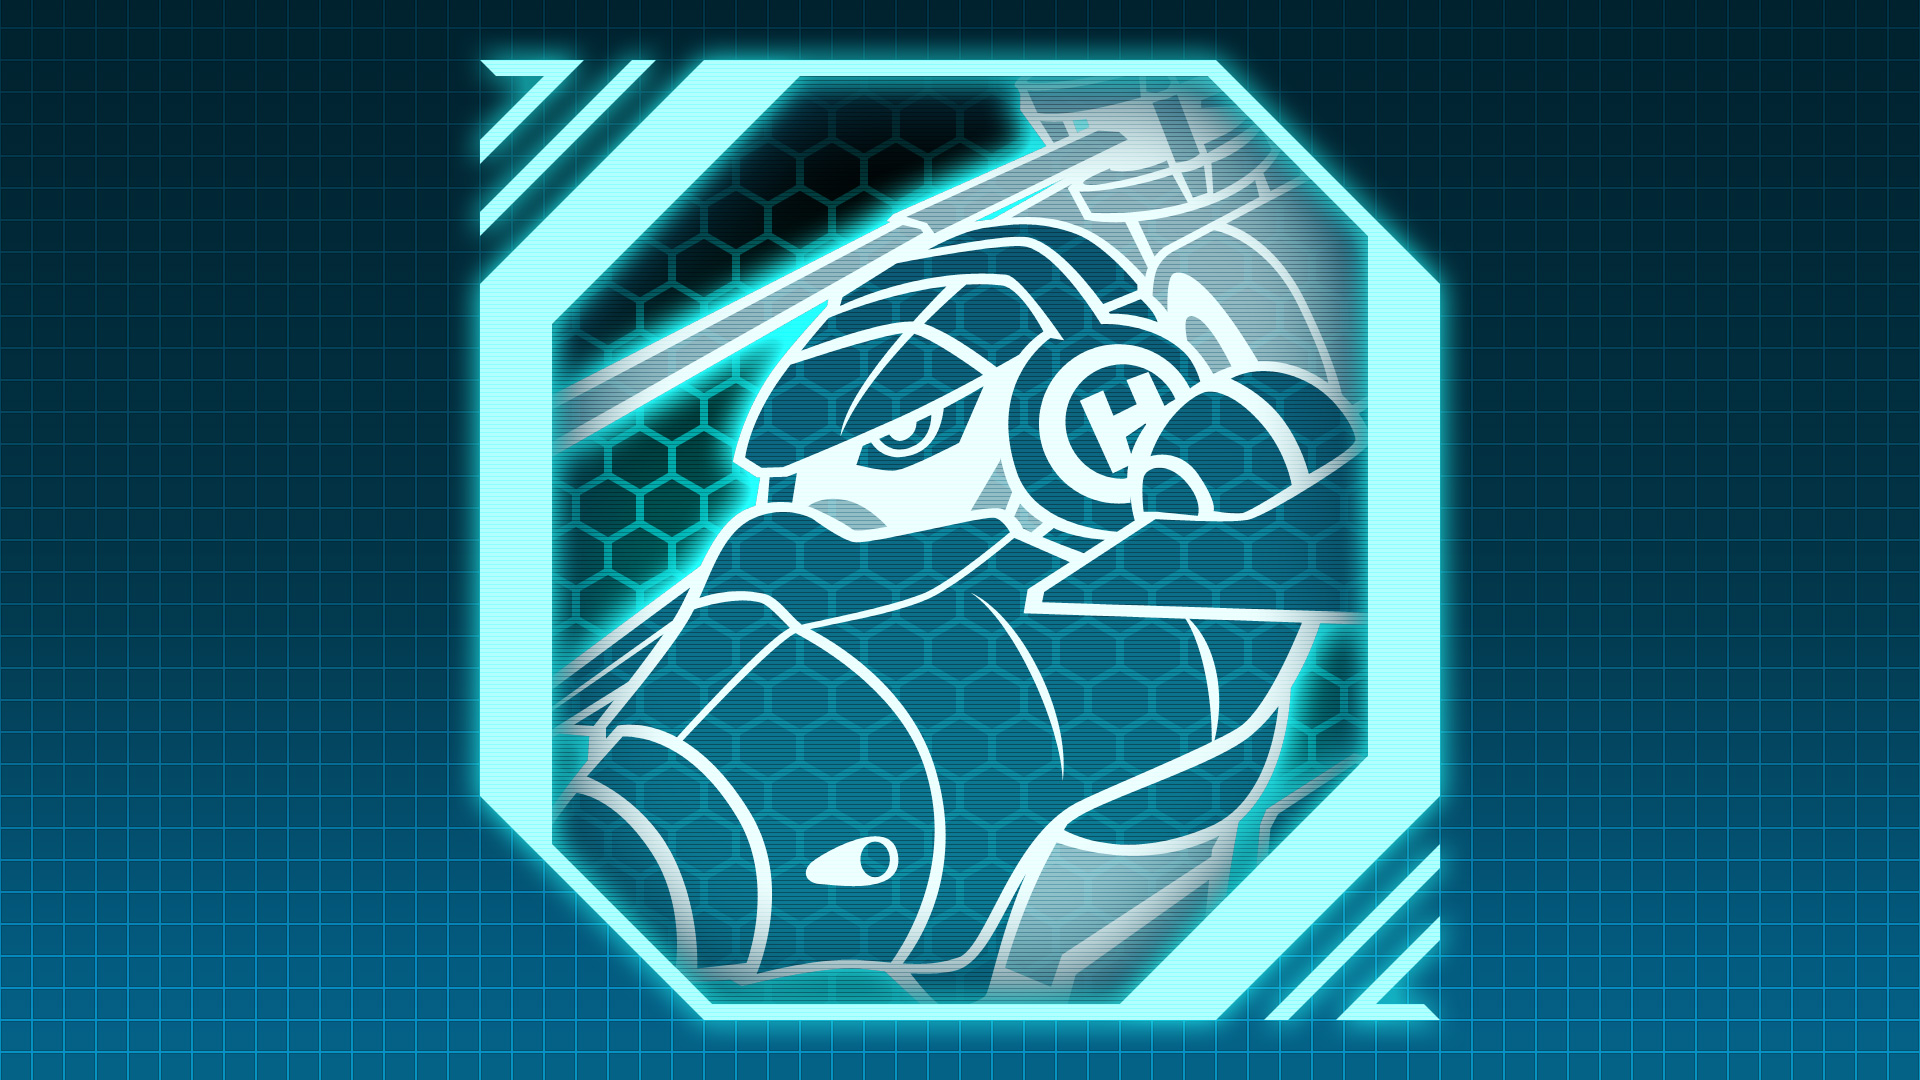 Icon for FINE PLAY! (Mighty No. 6)